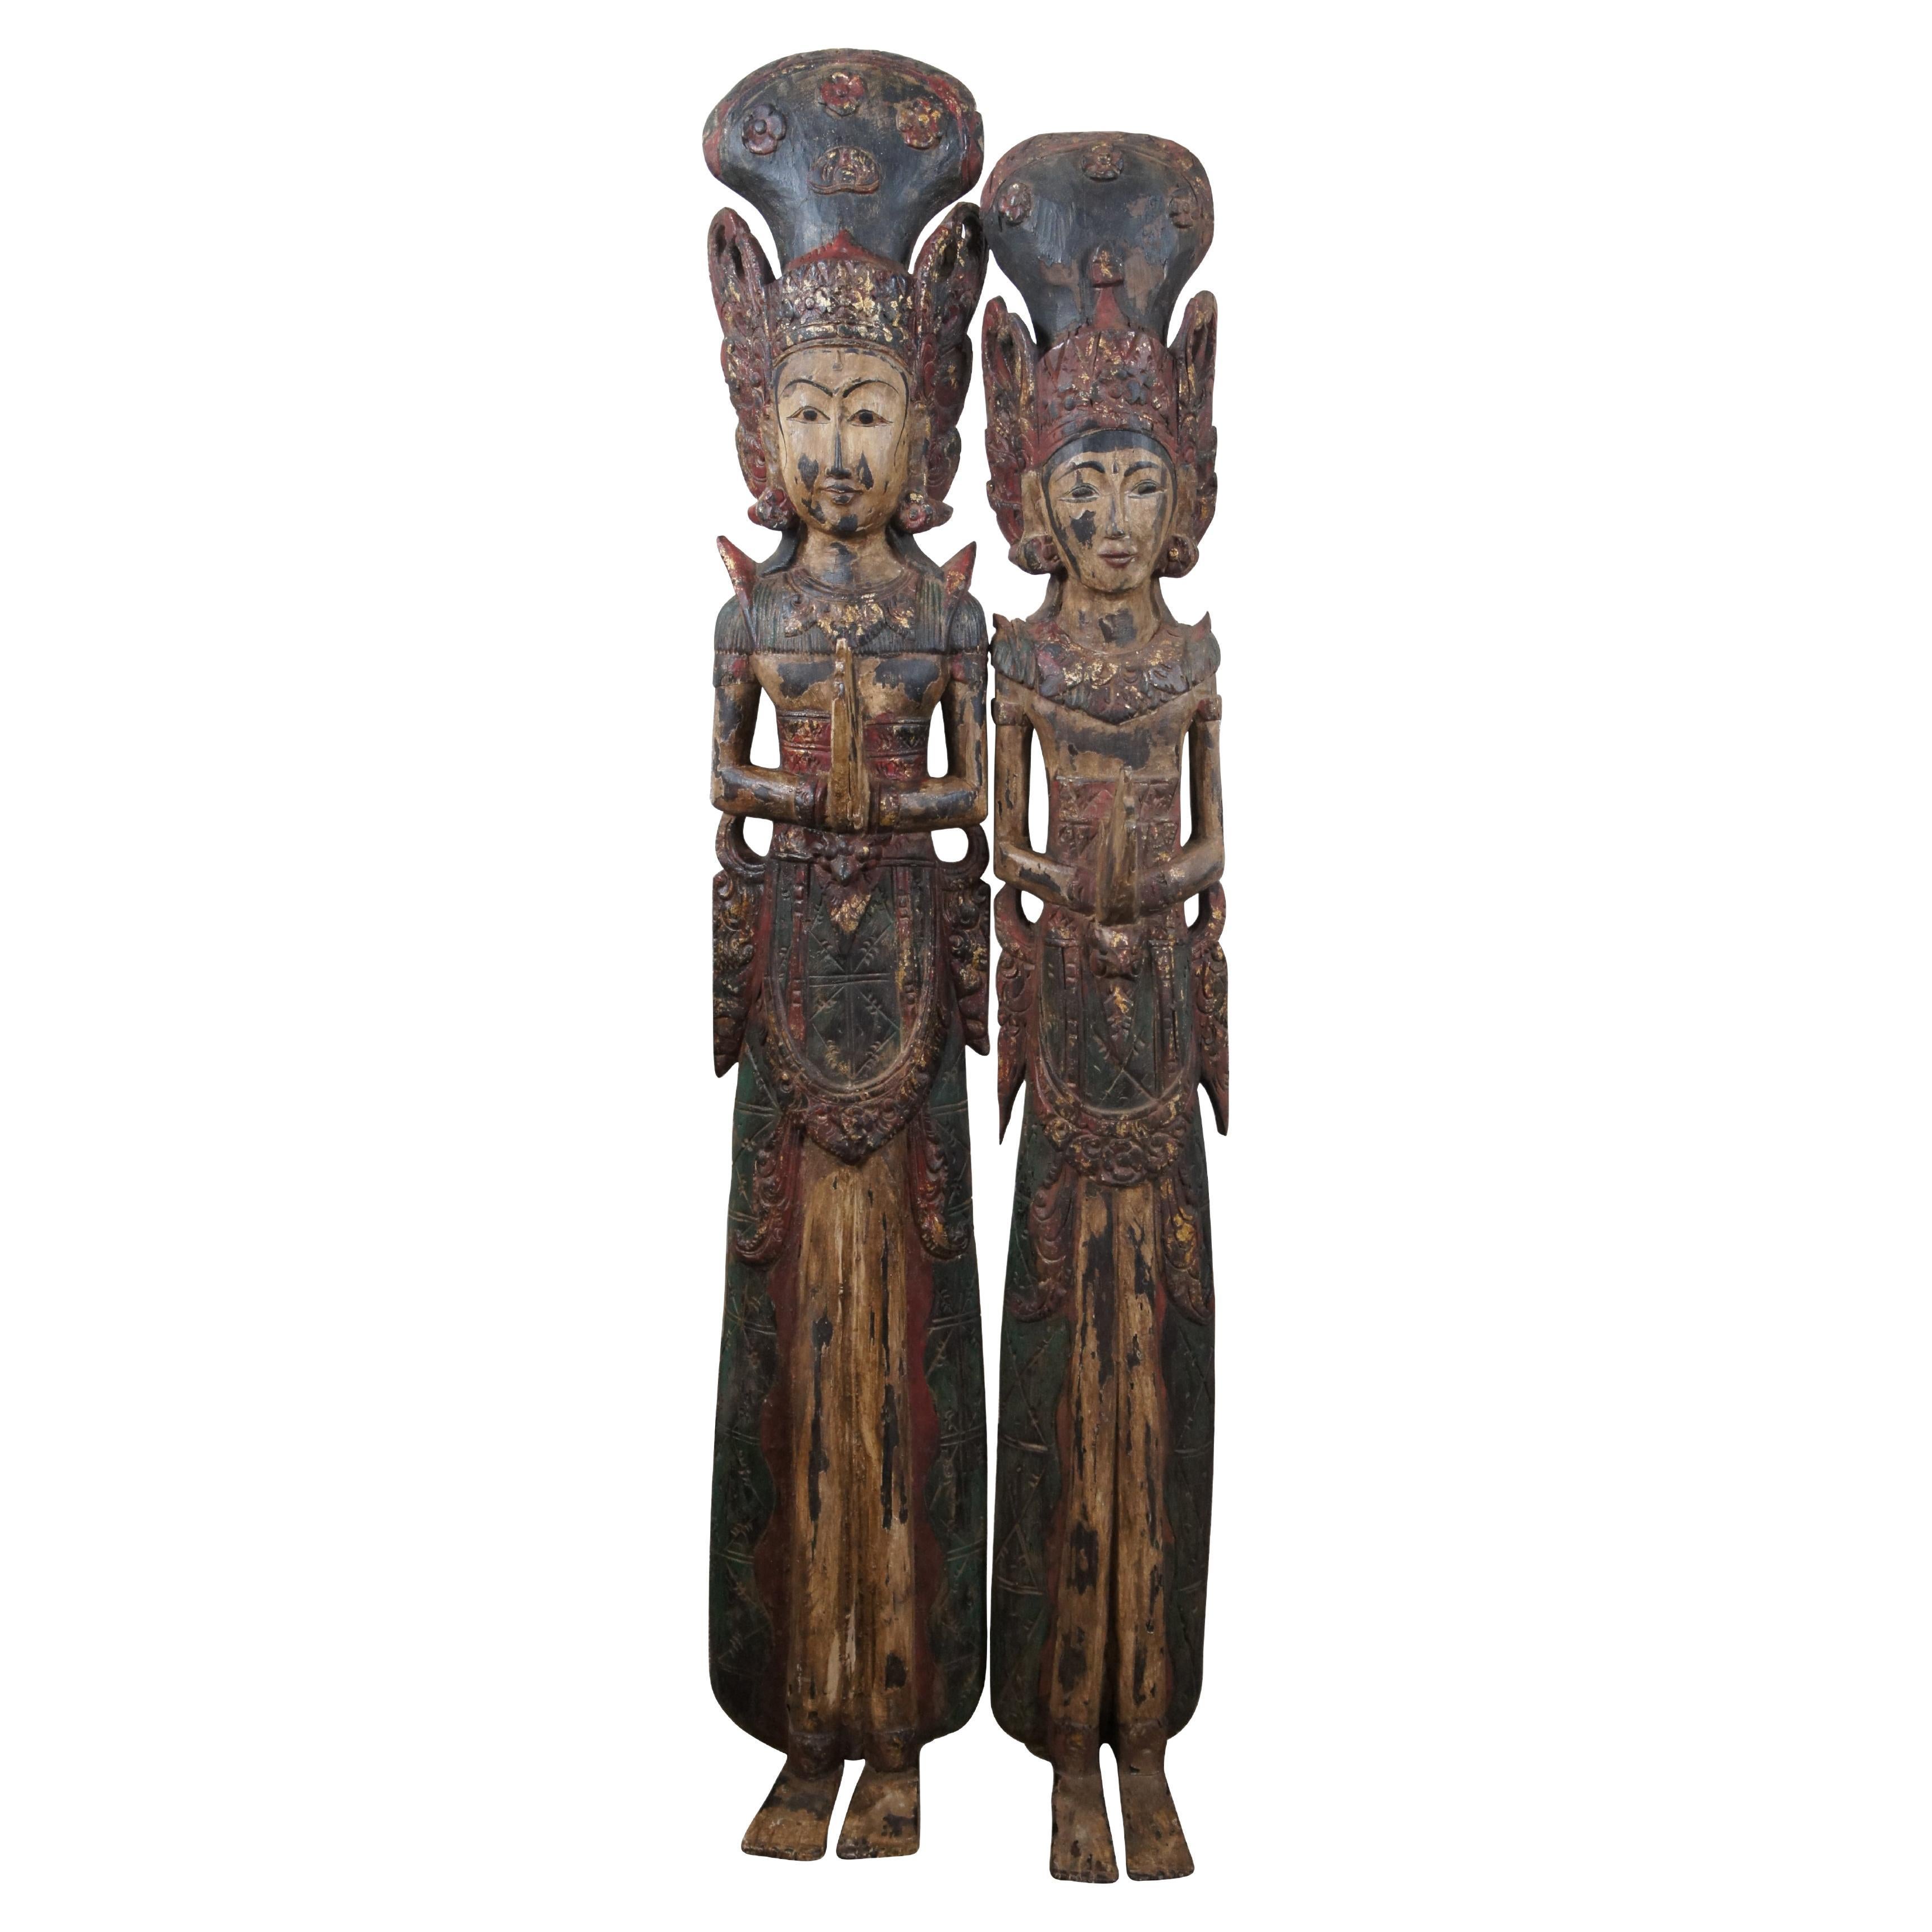 2 Carved Wood Thai Thepanom Buddist Angel Diety Hanging Statue Figures For Sale